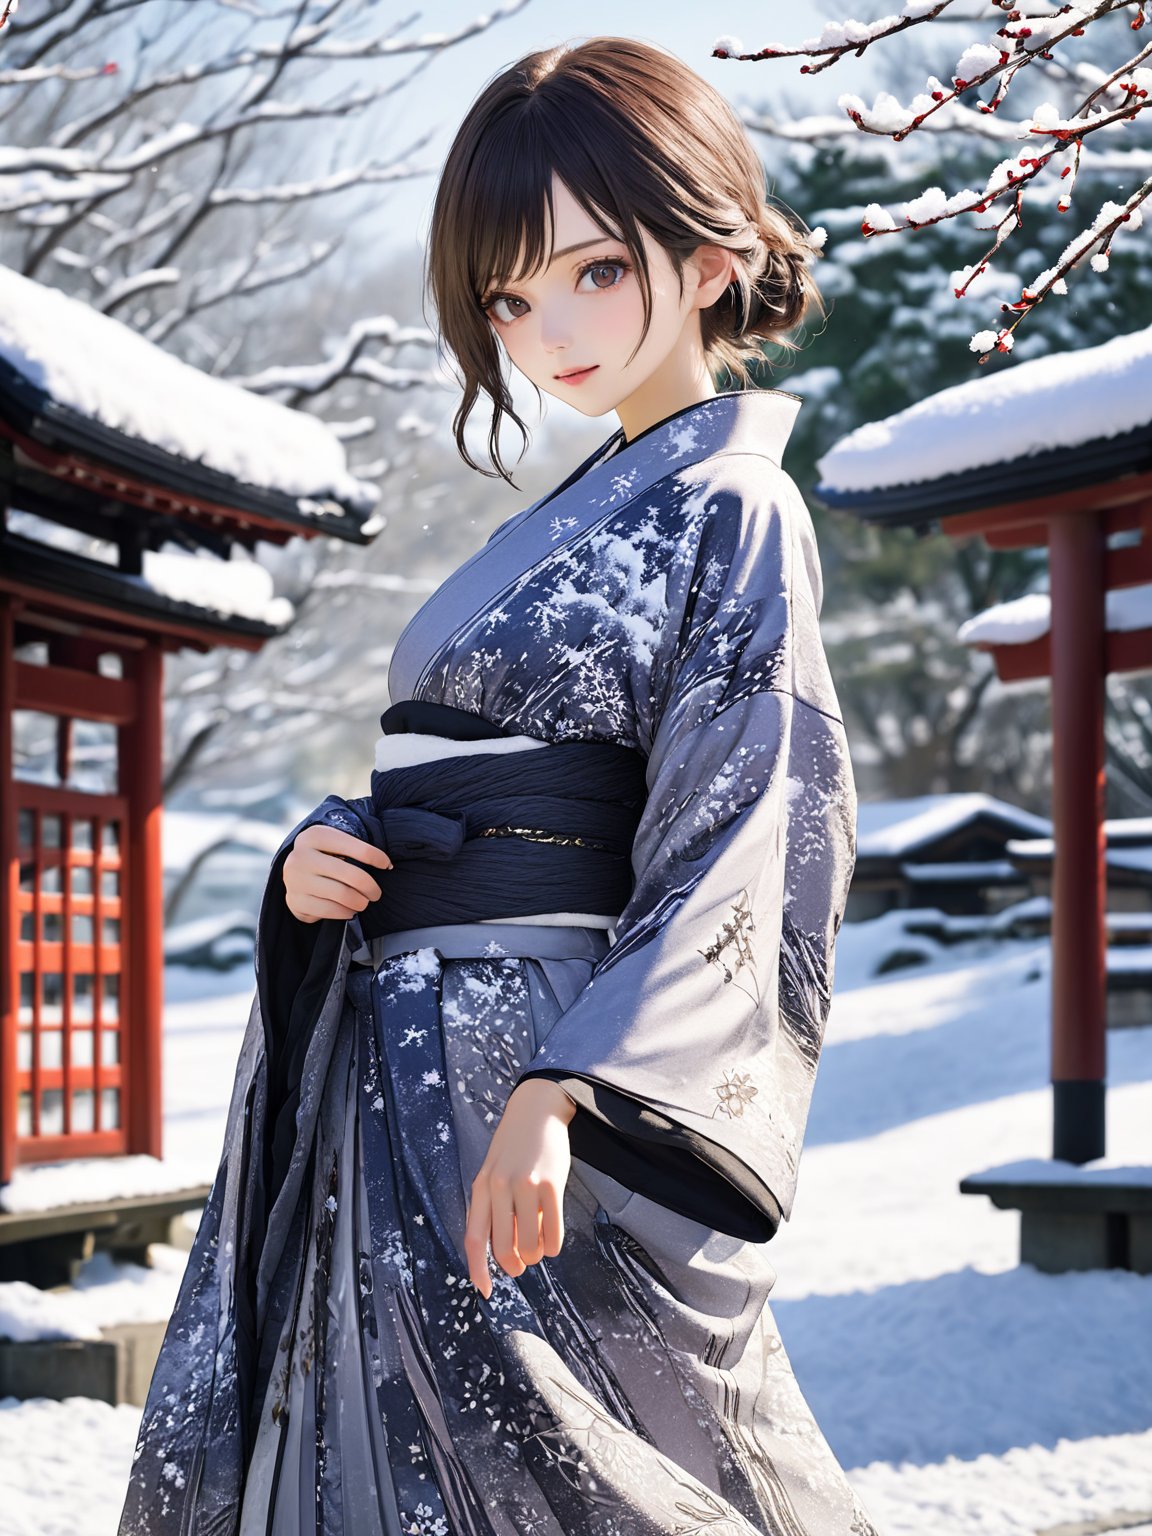 //Quality,
photo r3al, detailmaster2, masterpiece, photorealistic, 8k, 8k UHD, best quality, ultra realistic, ultra detailed, hyperdetailed photography, real photo
,//Character,
1girl, solo, cowboy_shot, looking_at_viewer
,//Fashion,
kimono
,//Background,
Kyoto, outdoors, winter, snow
,//Others,
goodbye,2b-Eimi